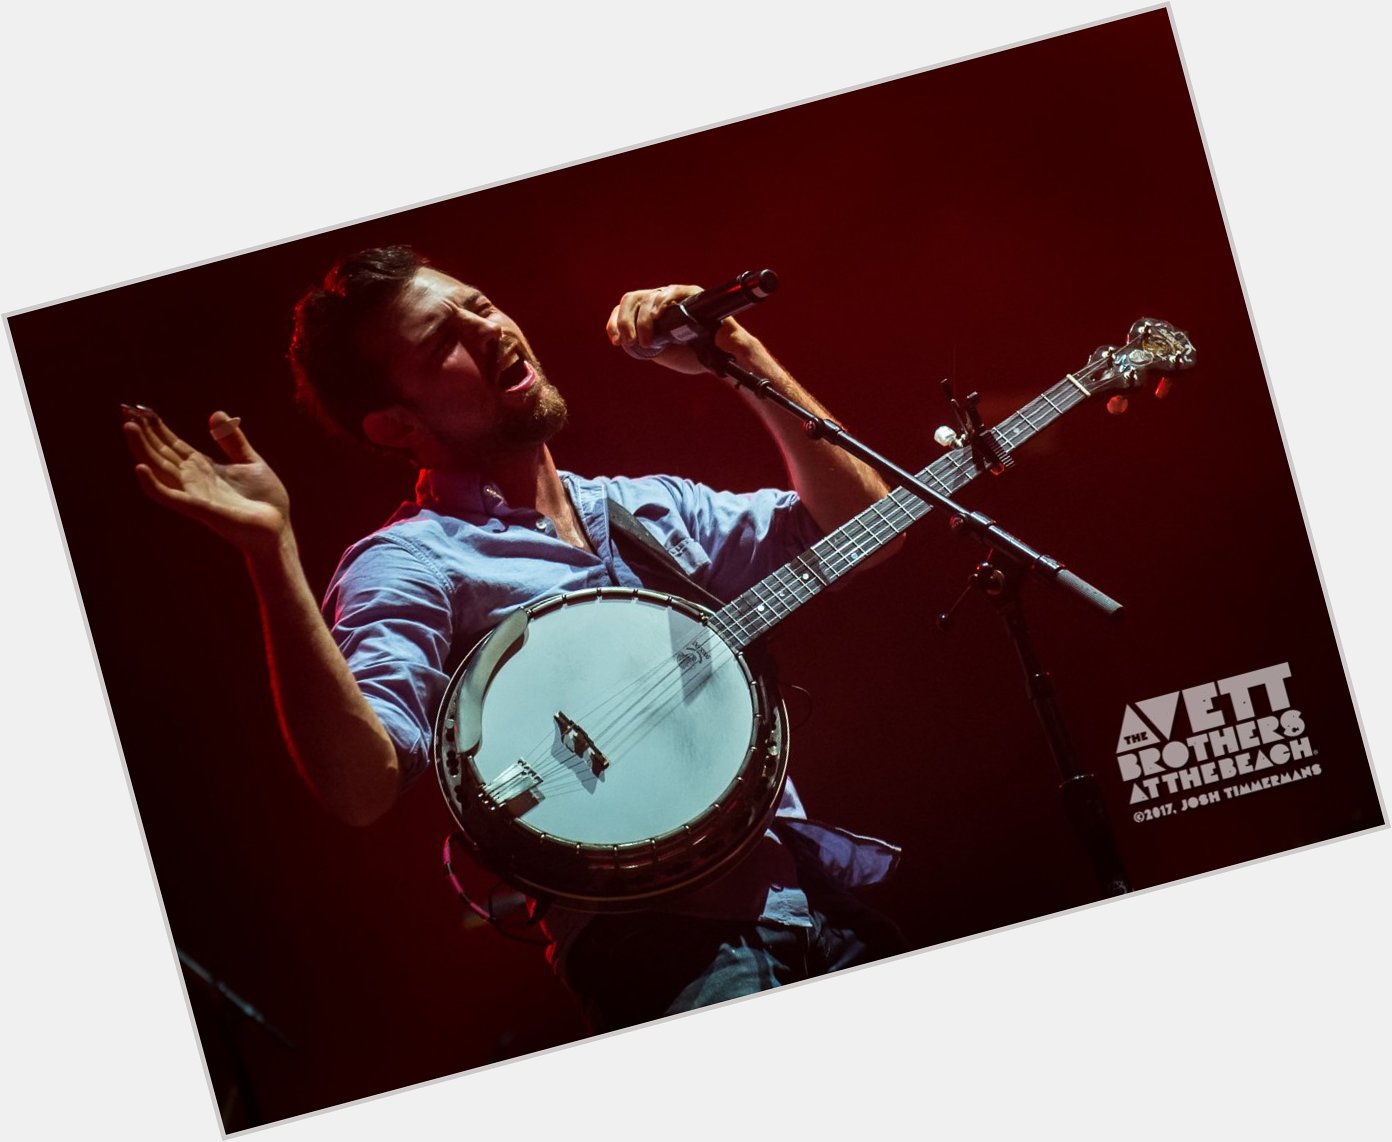 Wishing a very happy birthday to Scott Avett. Thank you for all of the music!  